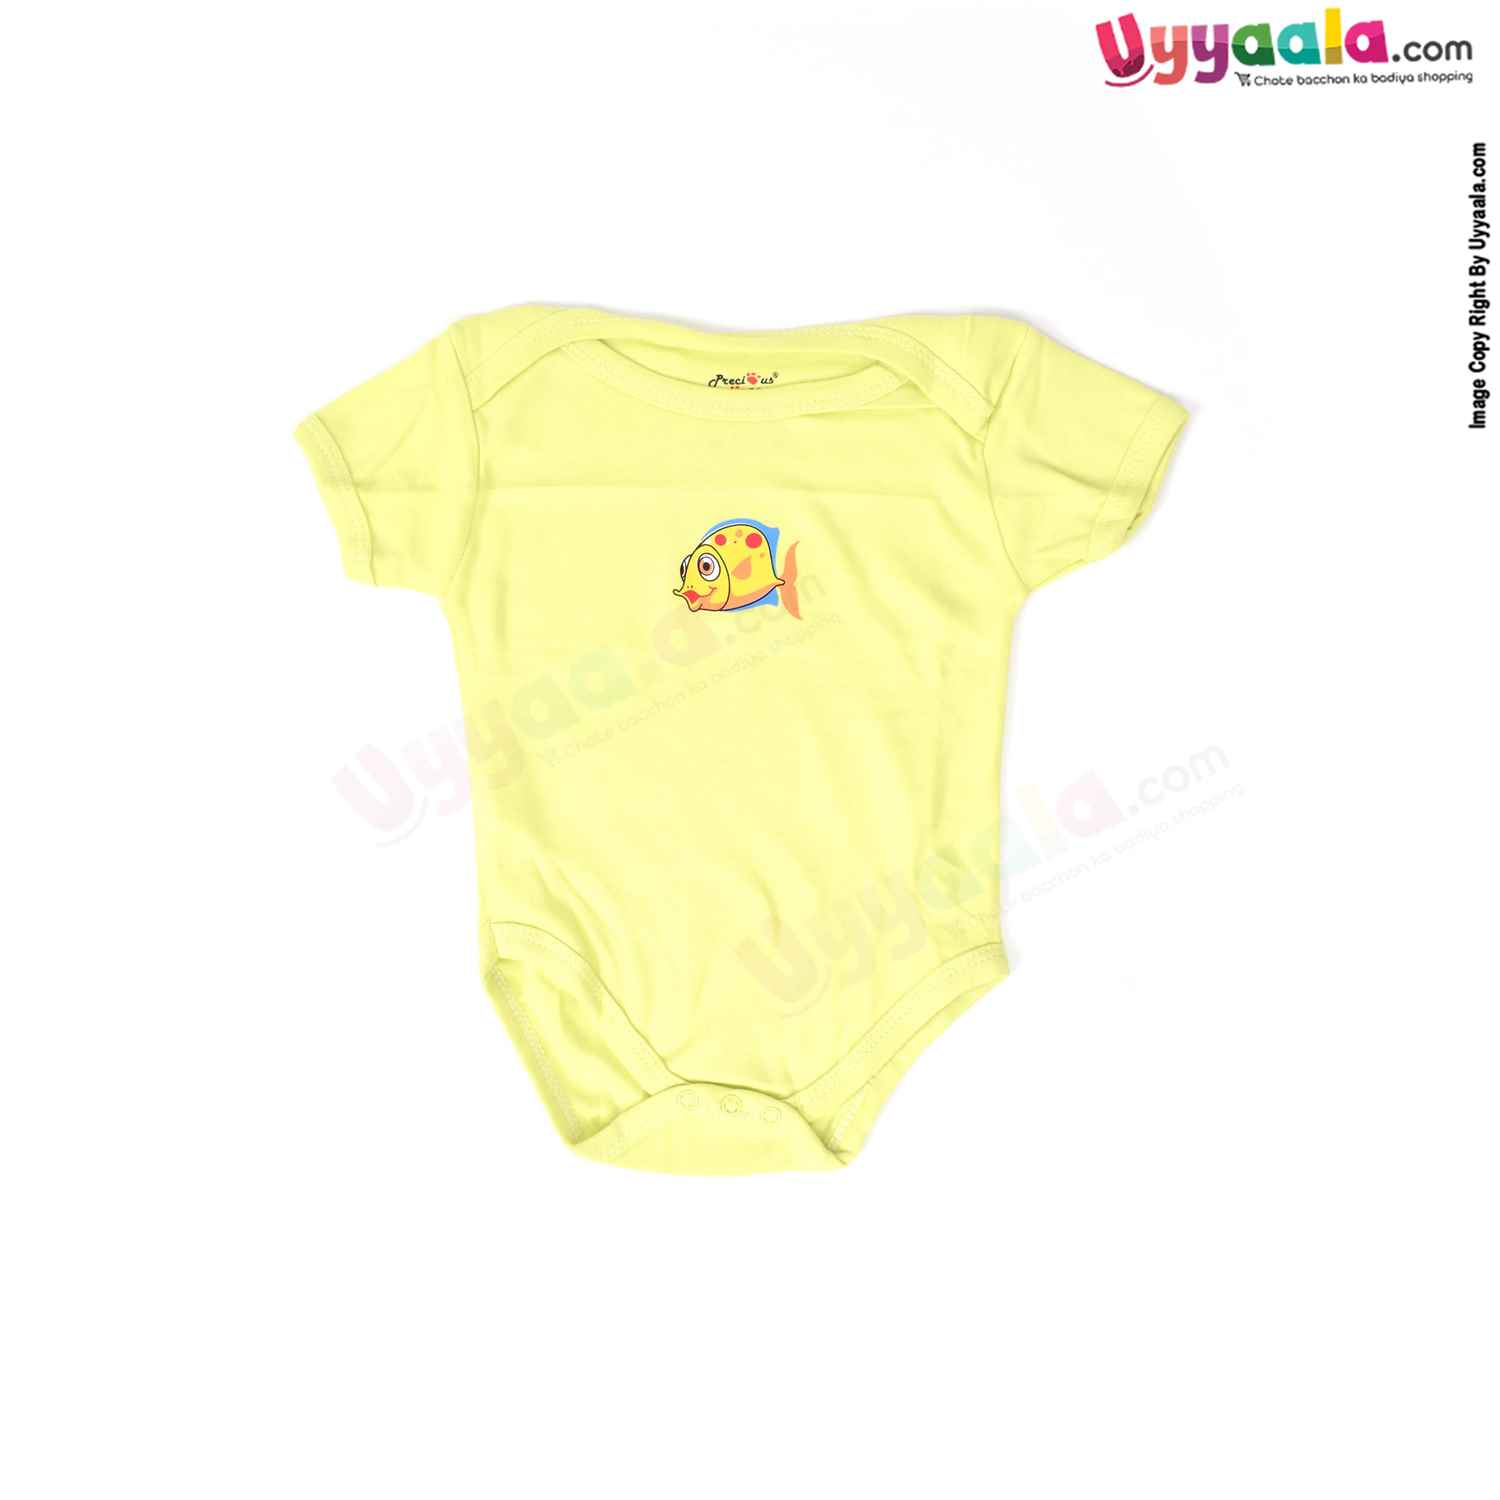 Precious One Short Sleeve Body Suit 100% Soft Hosiery Cotton - Light Yellow with Fish Print (6-9M)